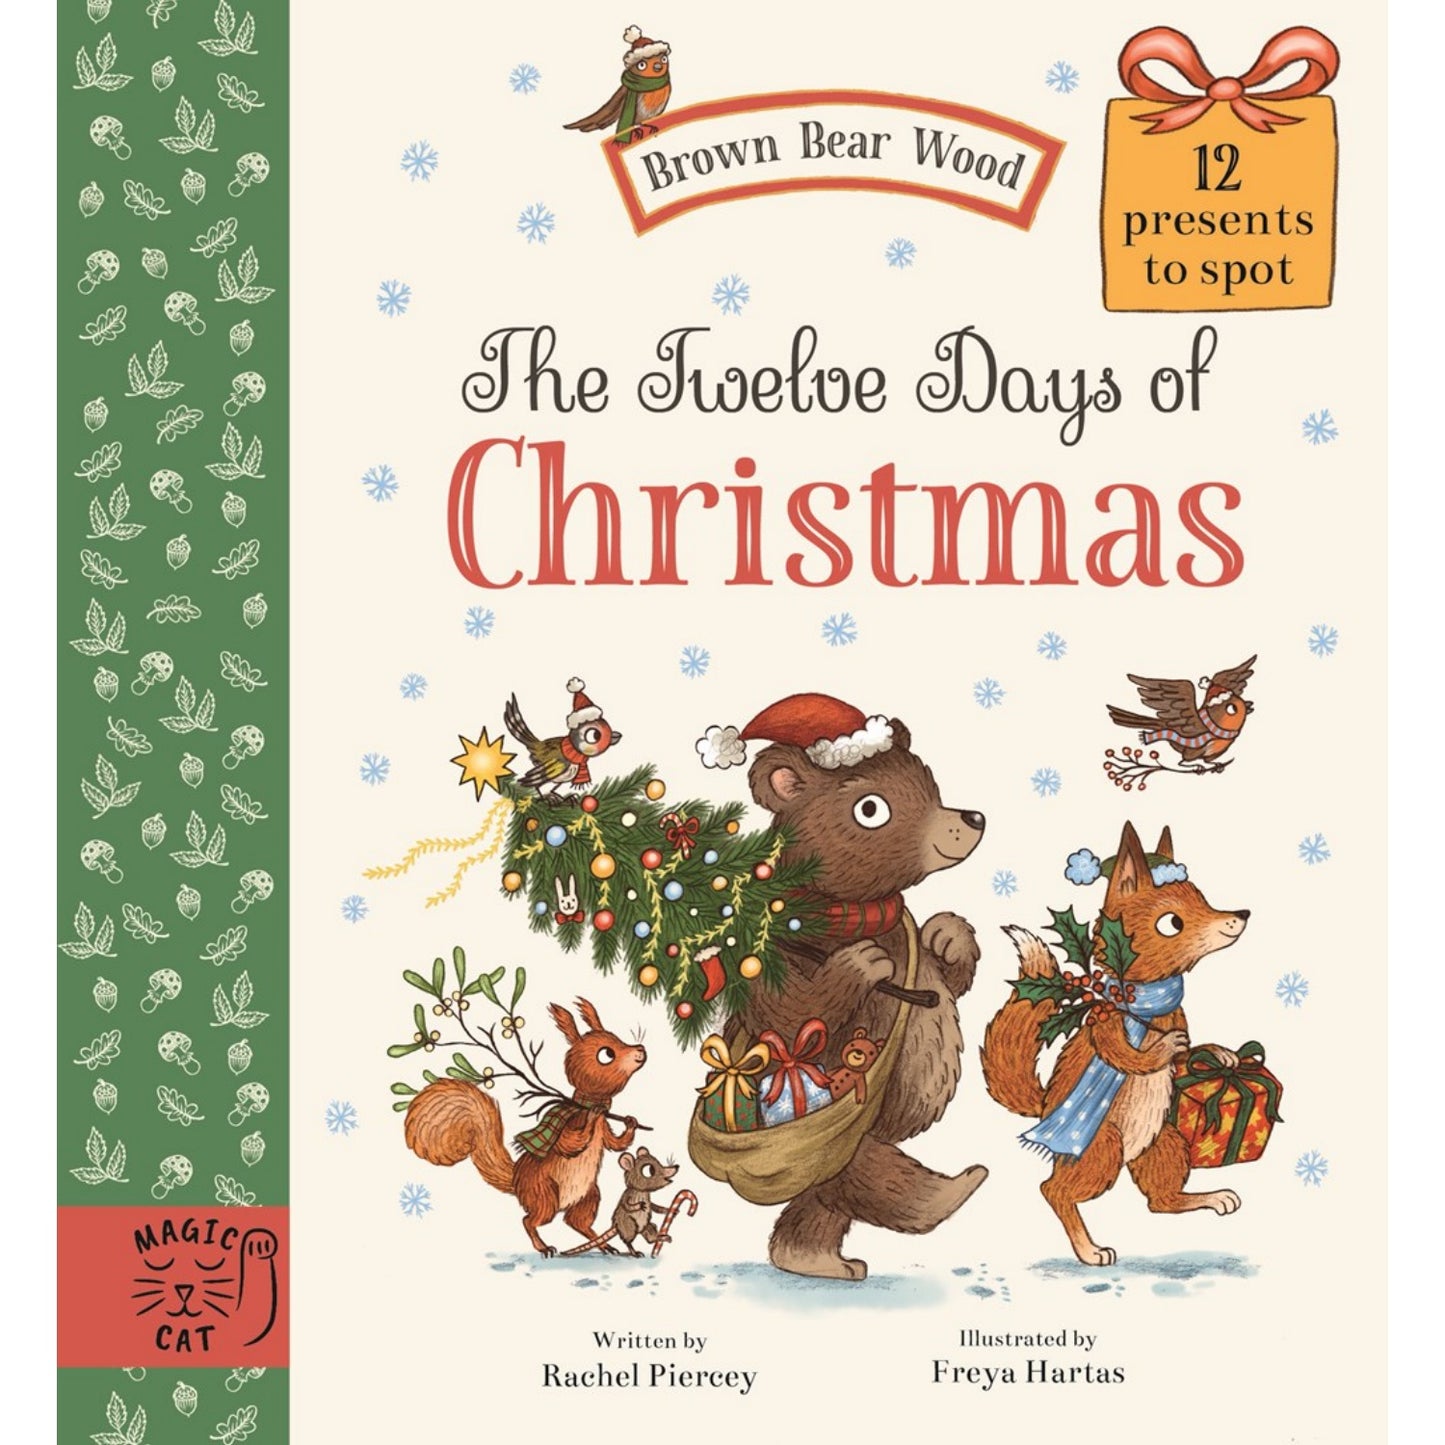 The Twelve Days of Christmas: 12 Presents to Find | Children’s Board Book